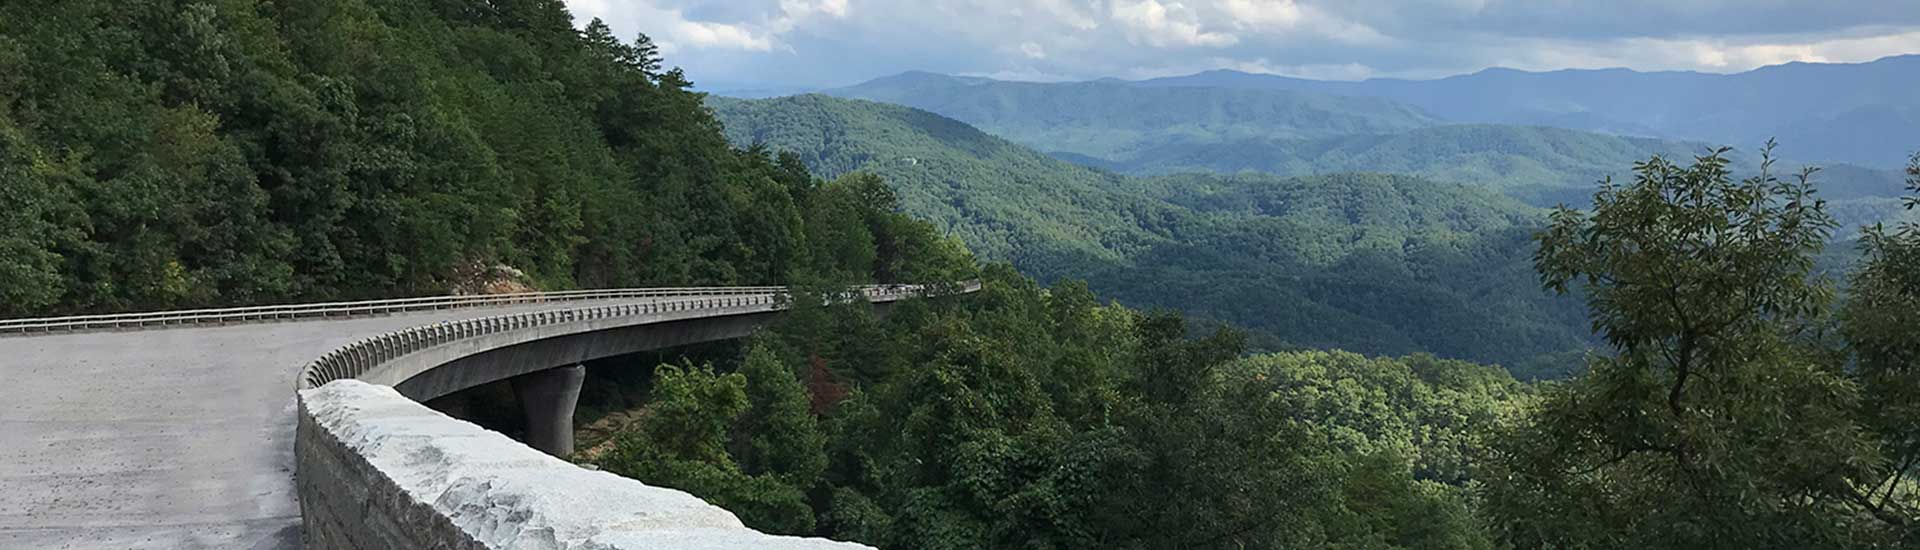 Valley view of green trees and blue ridges of Great Smoky Mountains from Foothills Parkway bridge, GSMNP